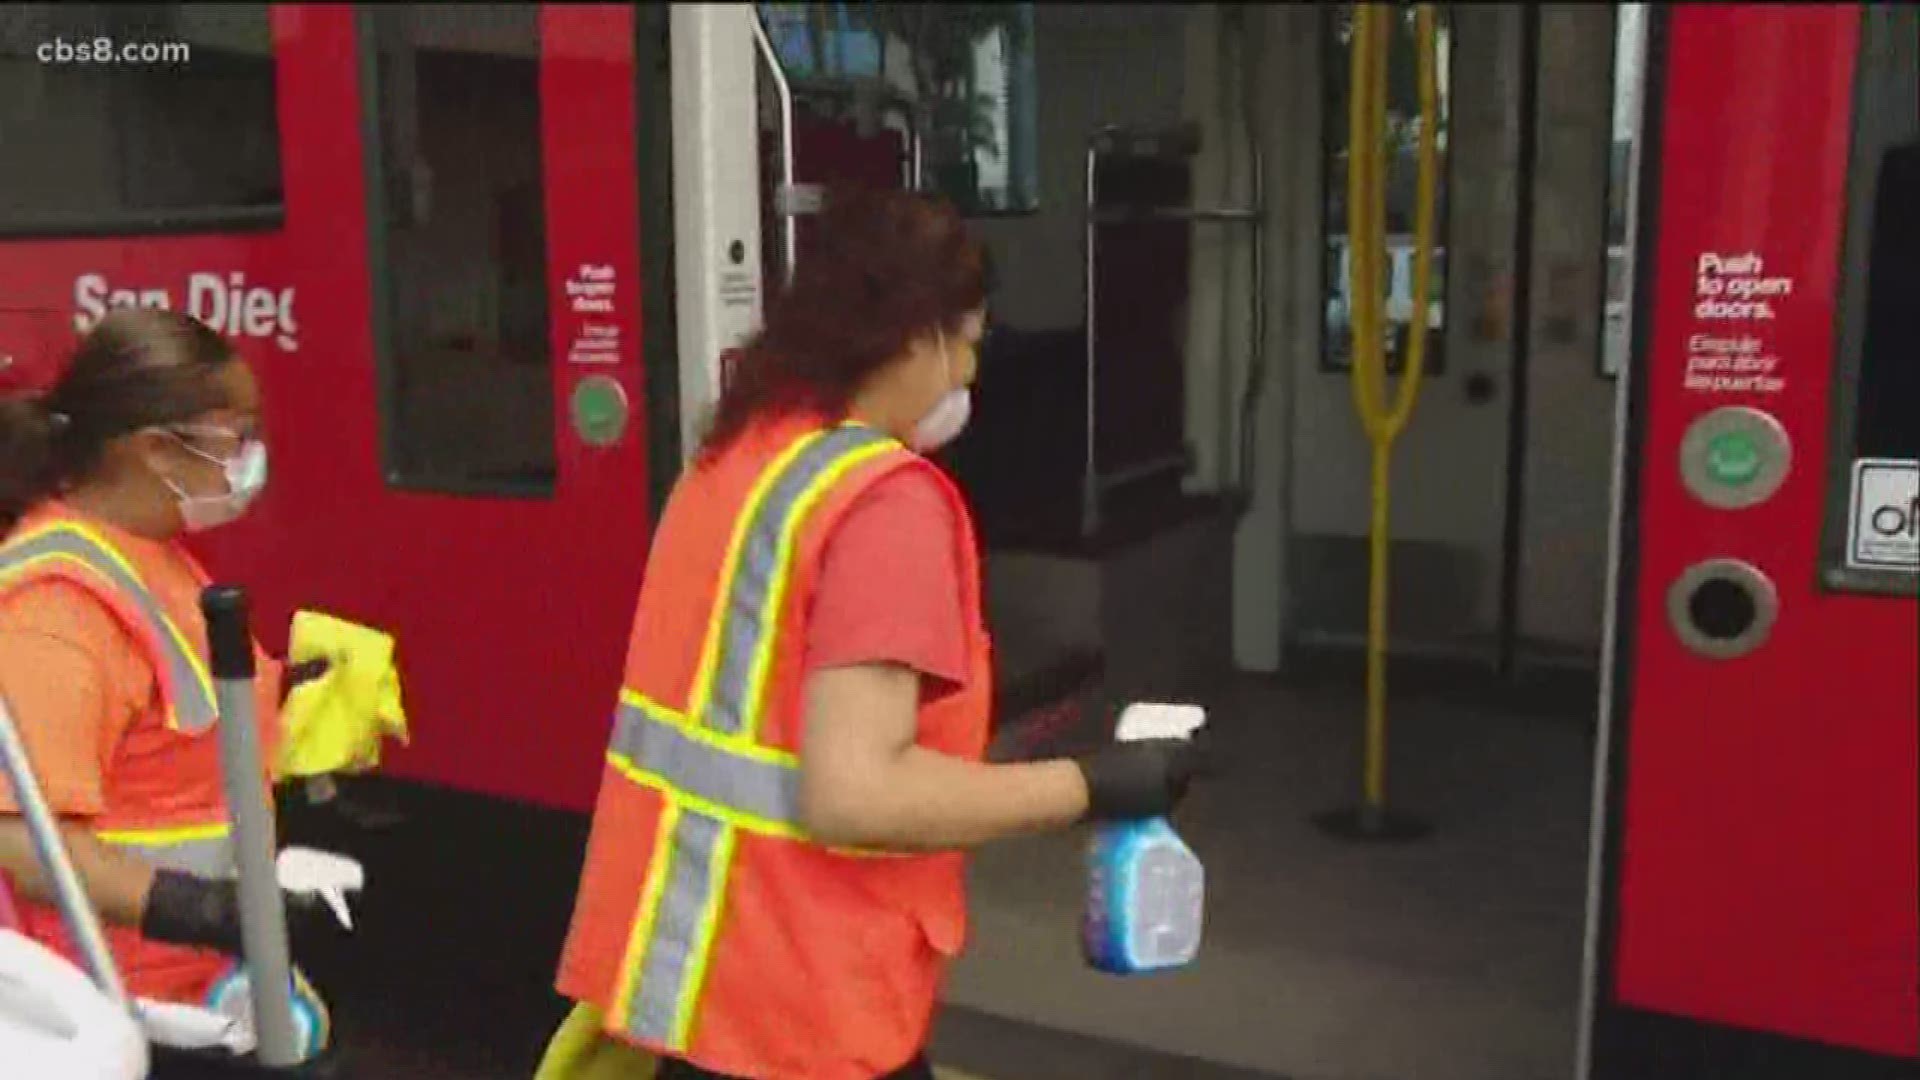 MTS says crews are cleaning the trolleys and buses from top to bottom.